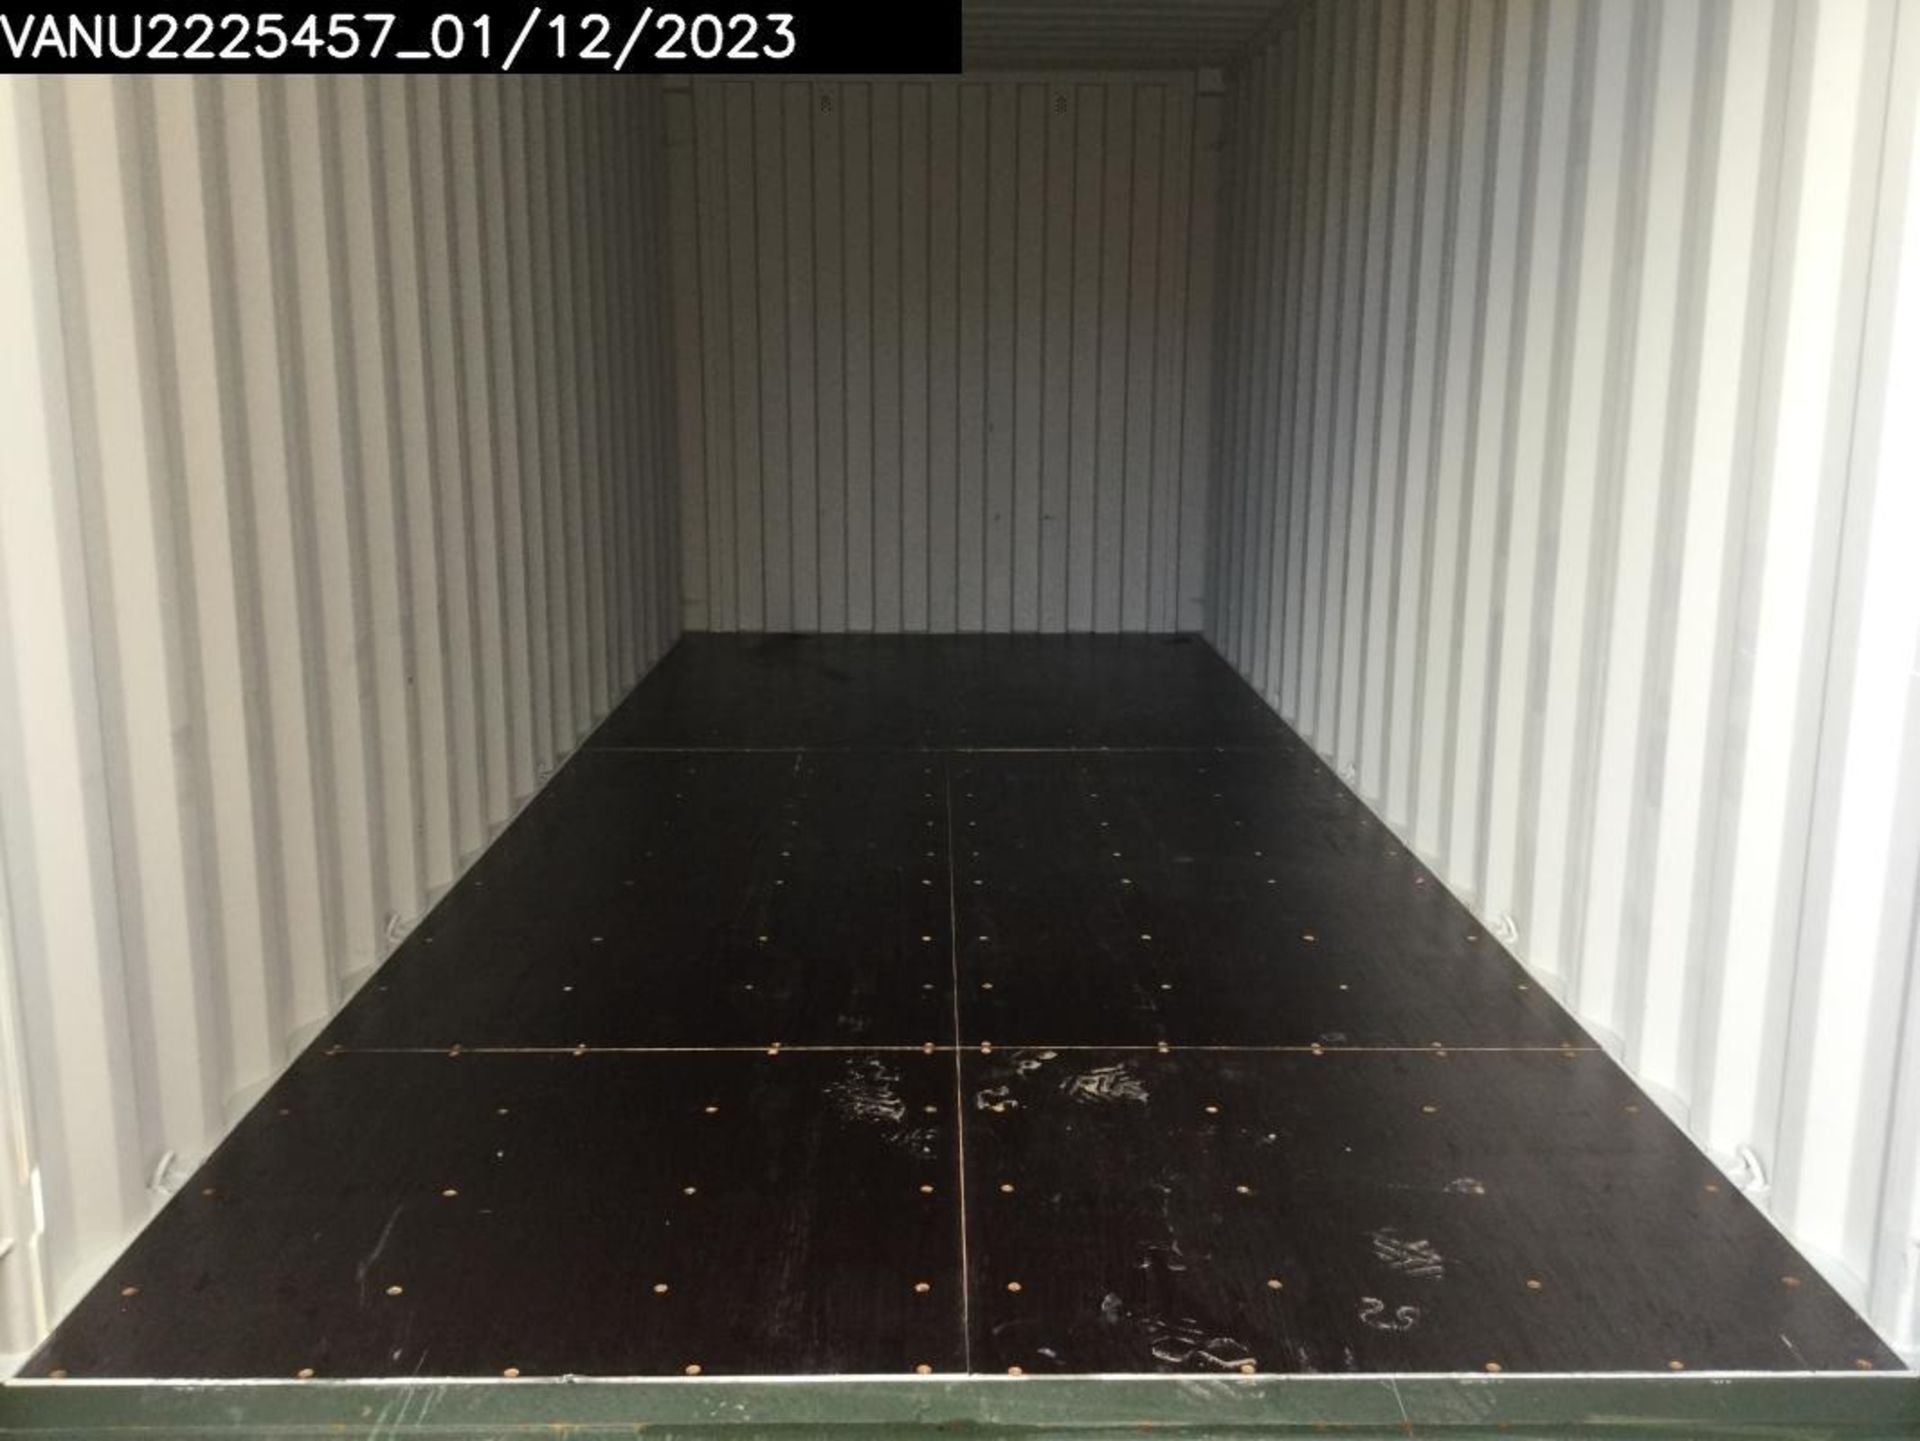 One Trip 20ft Shipping Container - Unit Number – VANU2225457 - Image 3 of 10